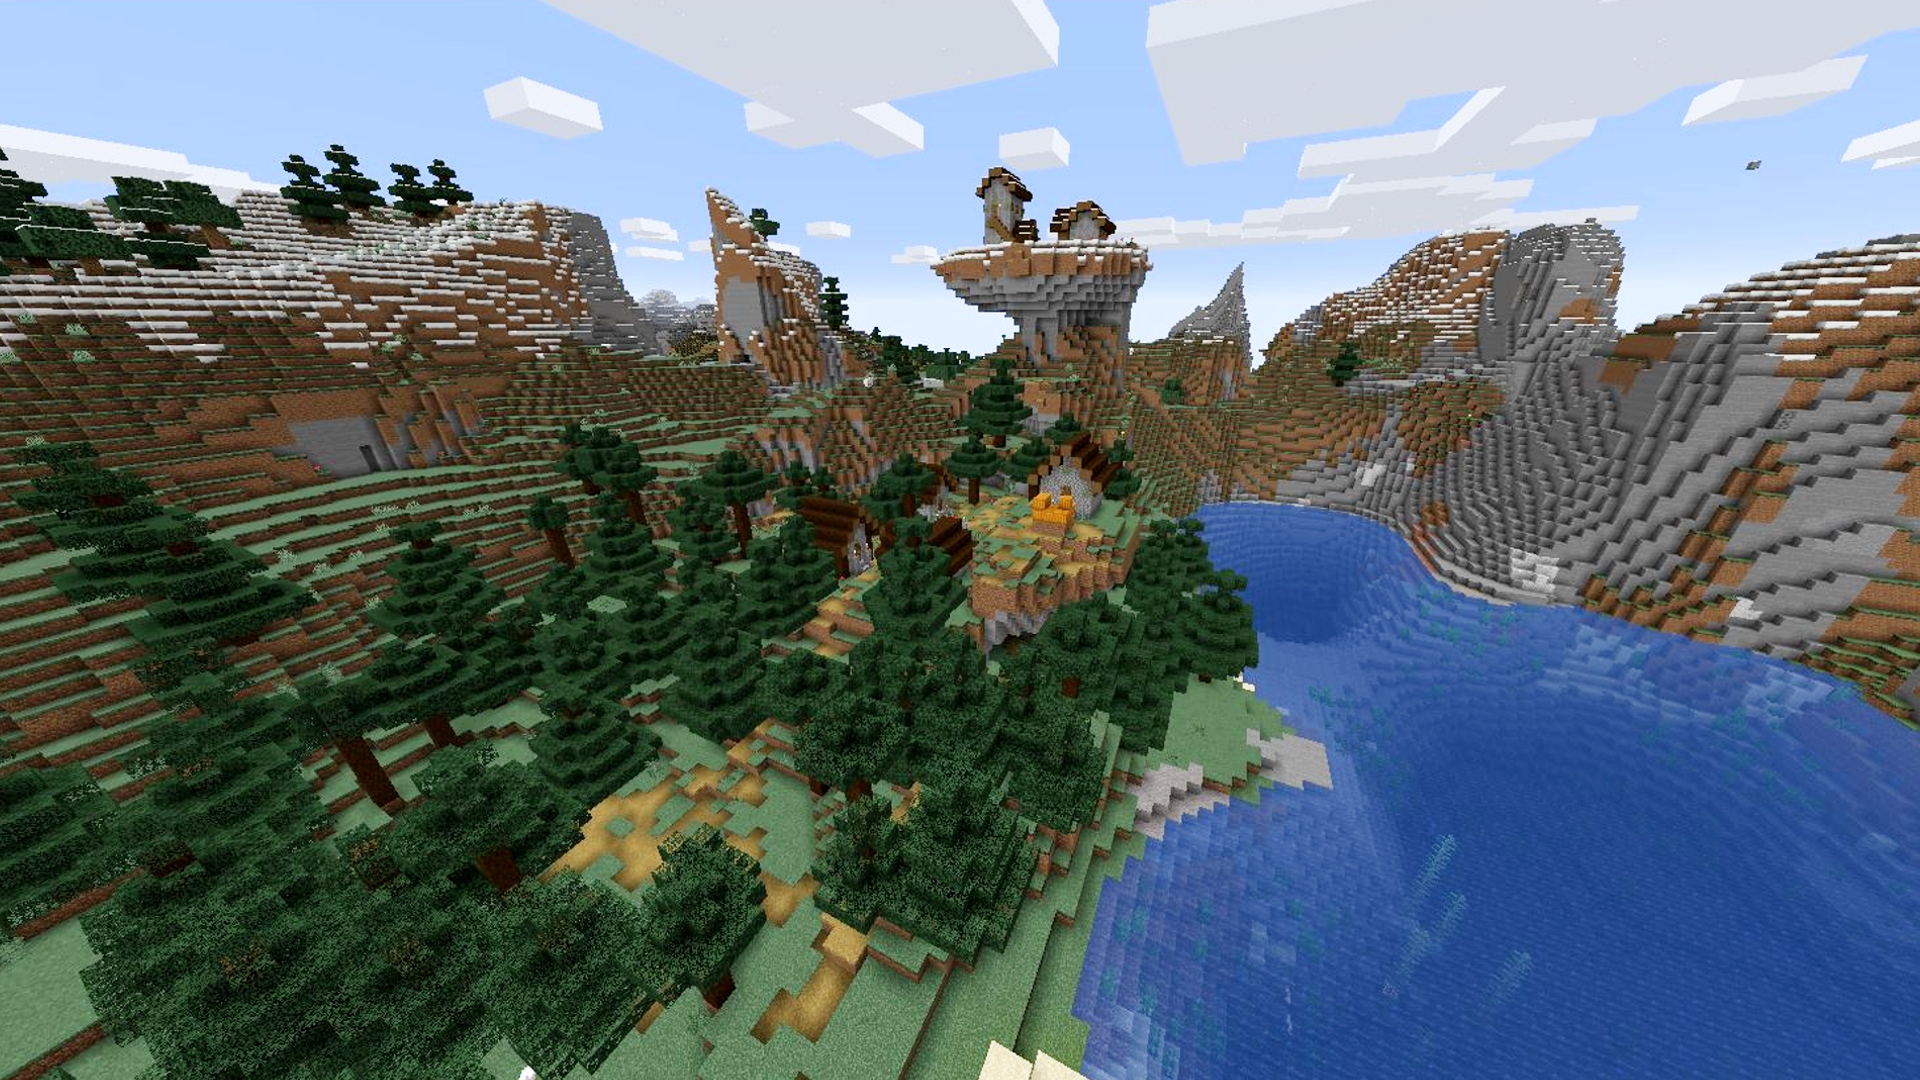 A Minecraft village in a taiga biome with a few houses on a snowy mountain plateau